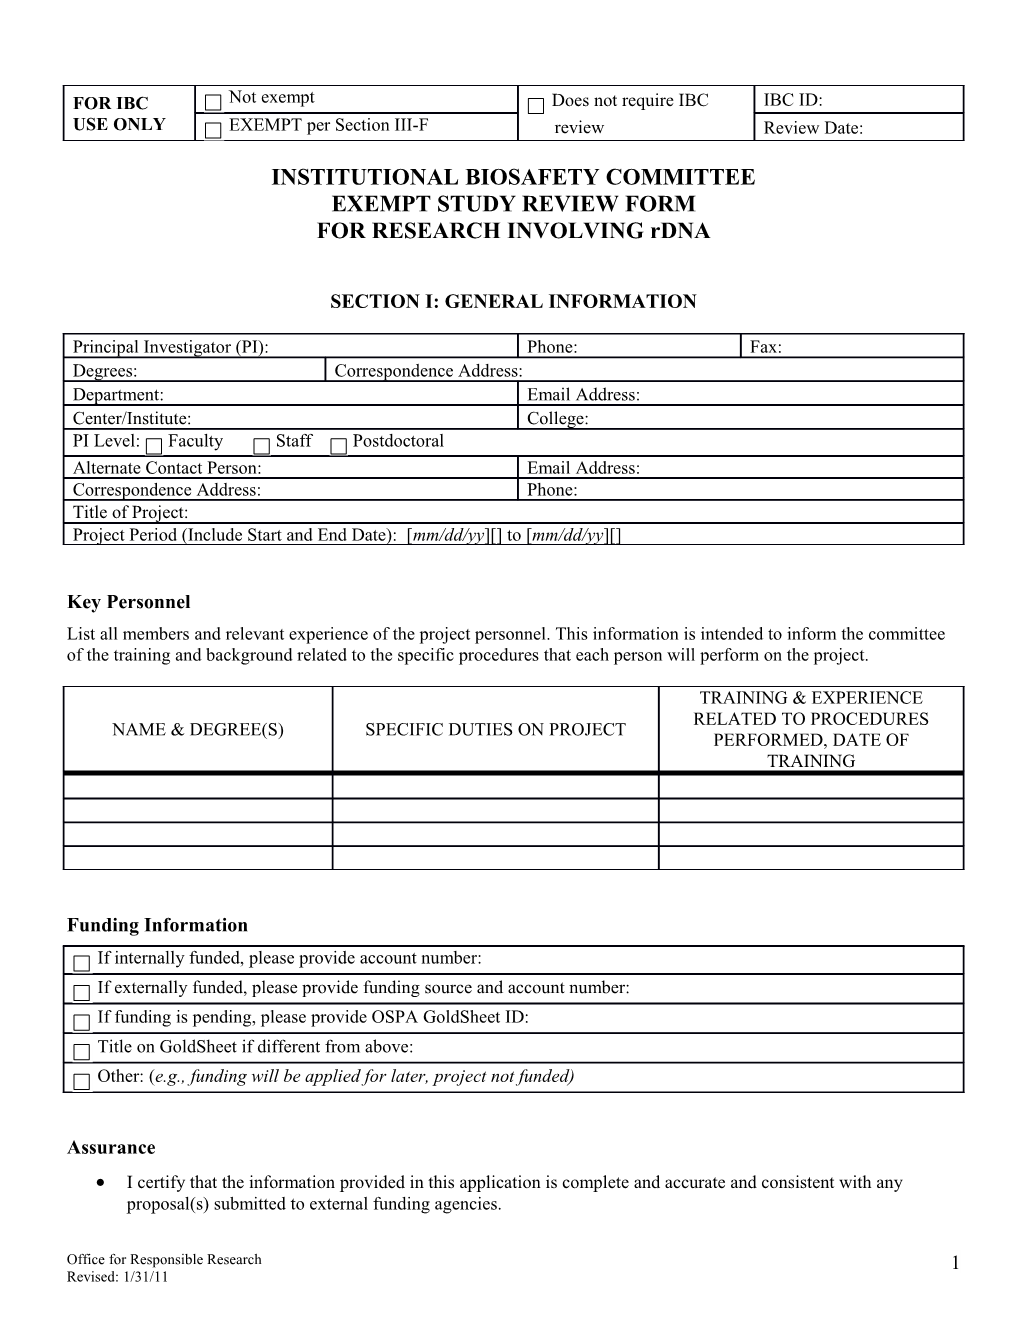 Exempt Study Review Form